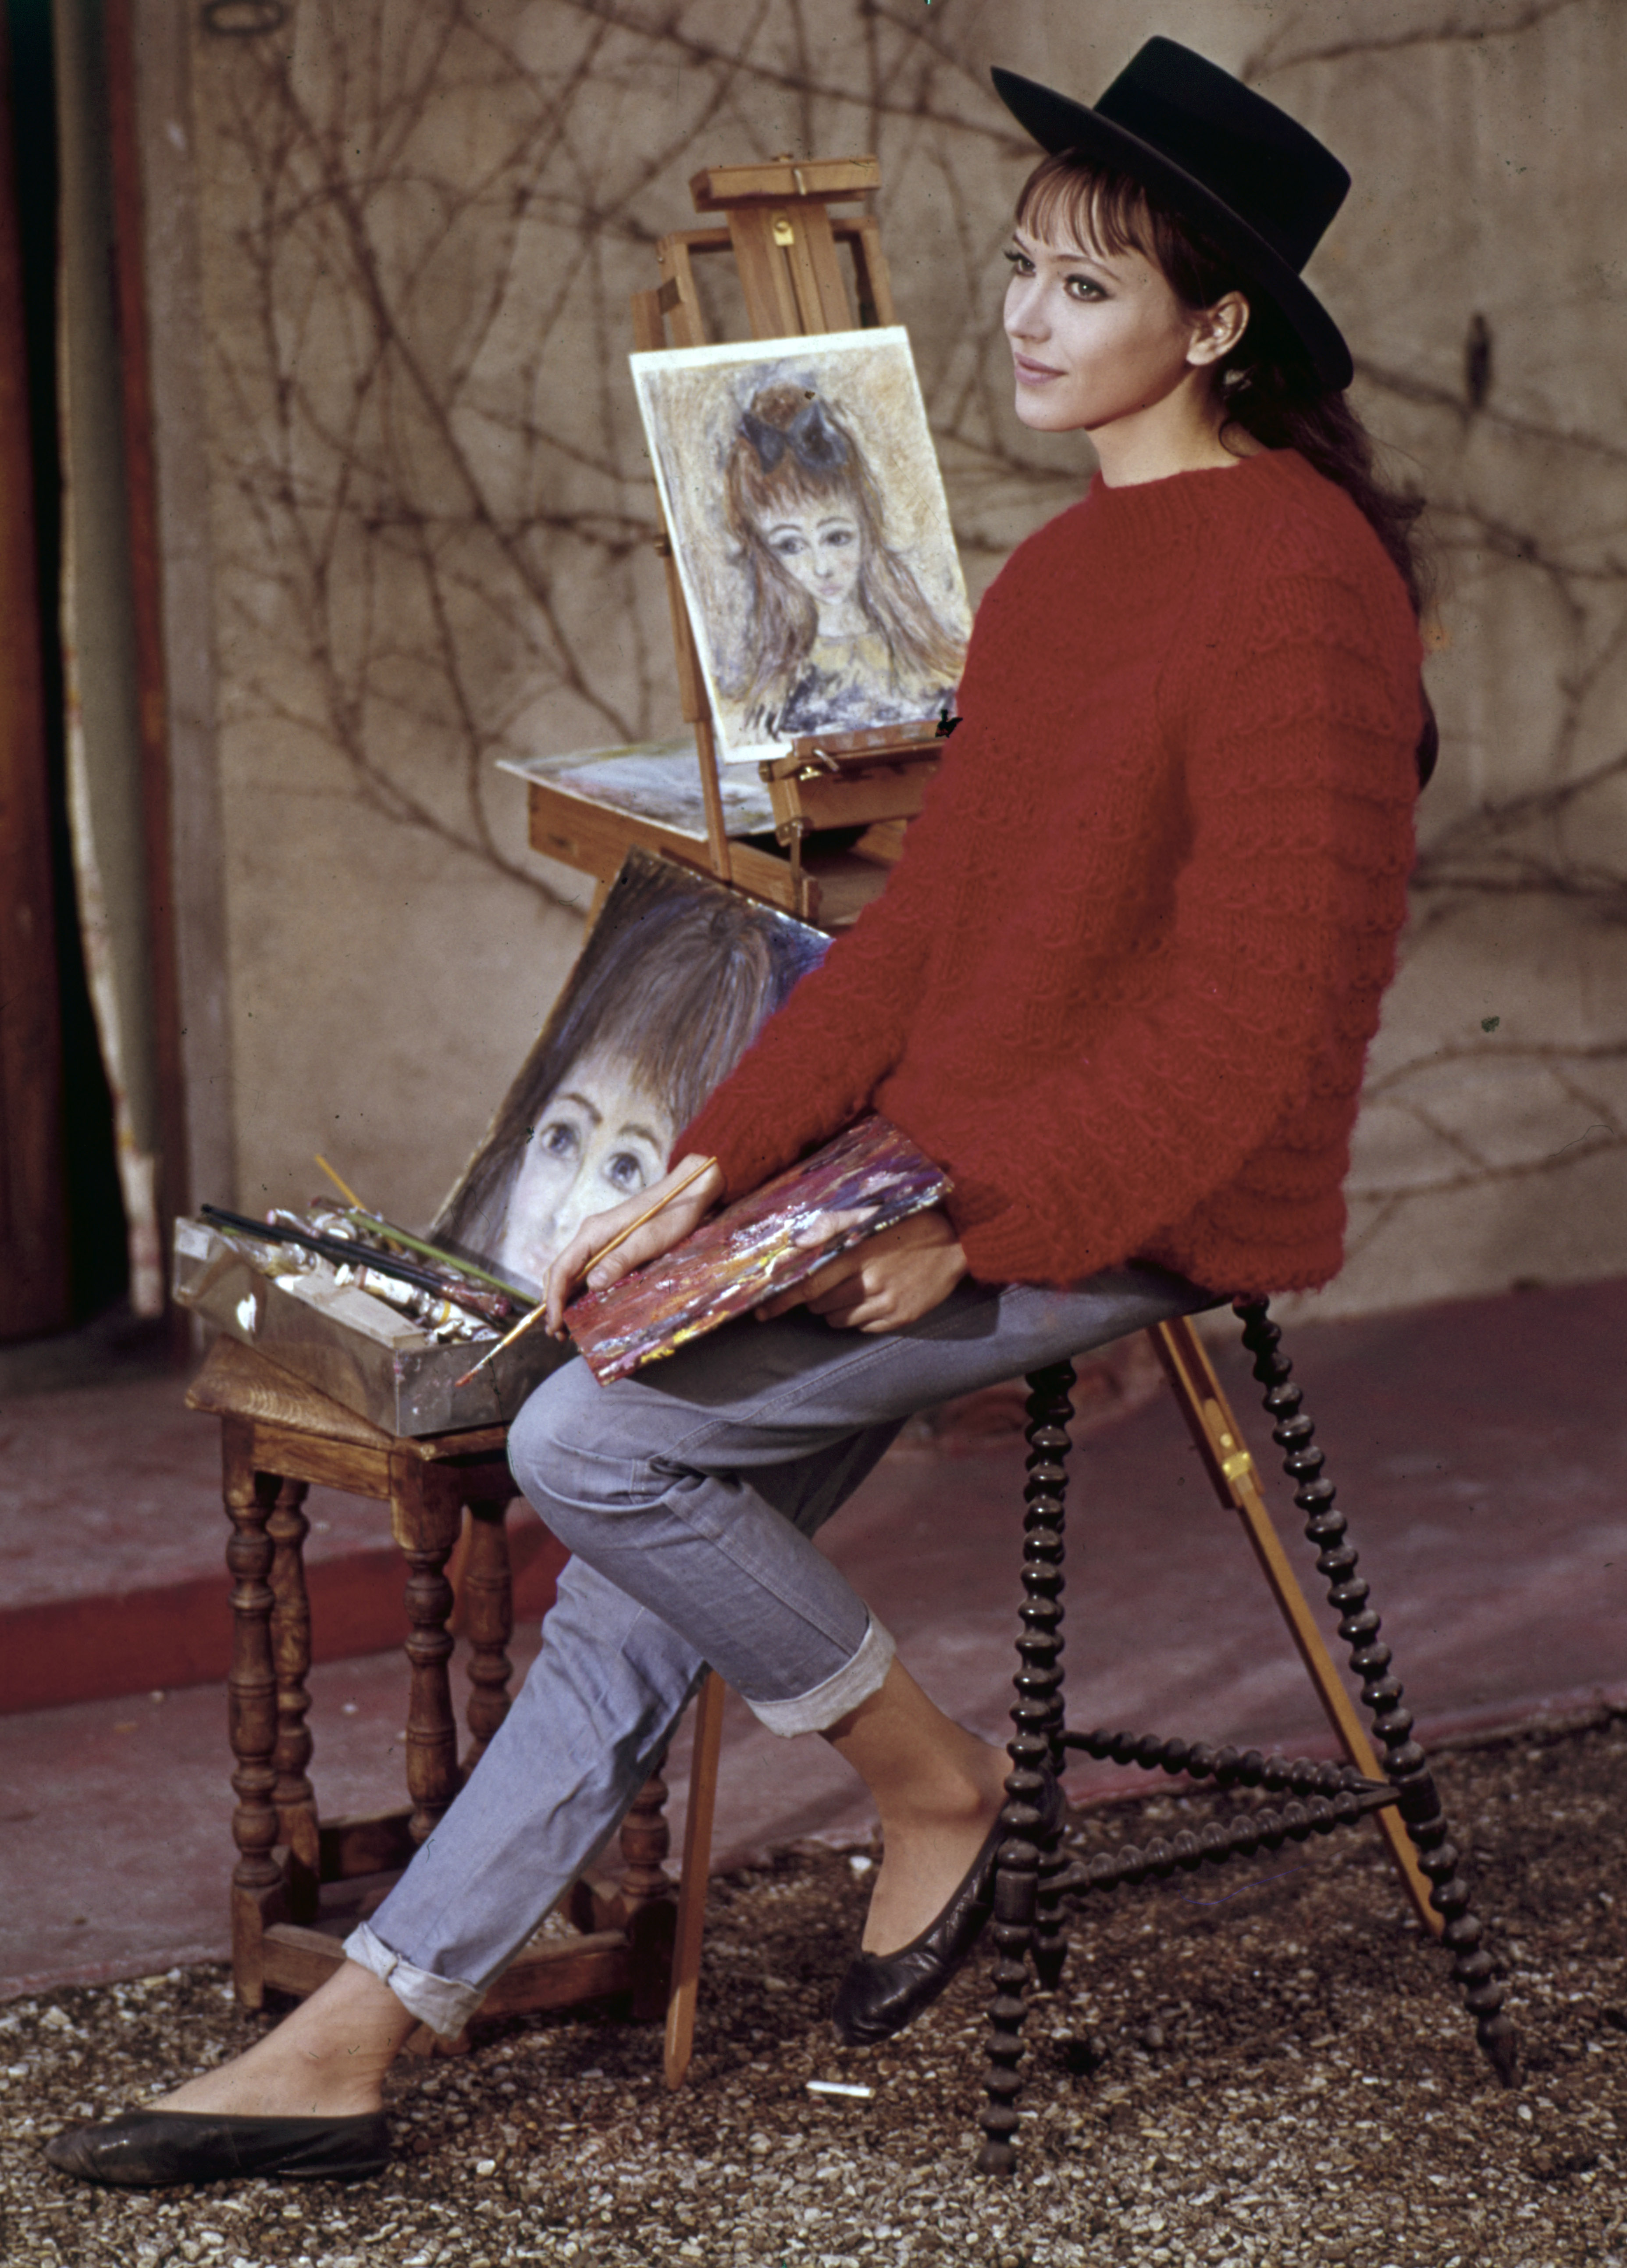 anna karina painting outside at her home in paris